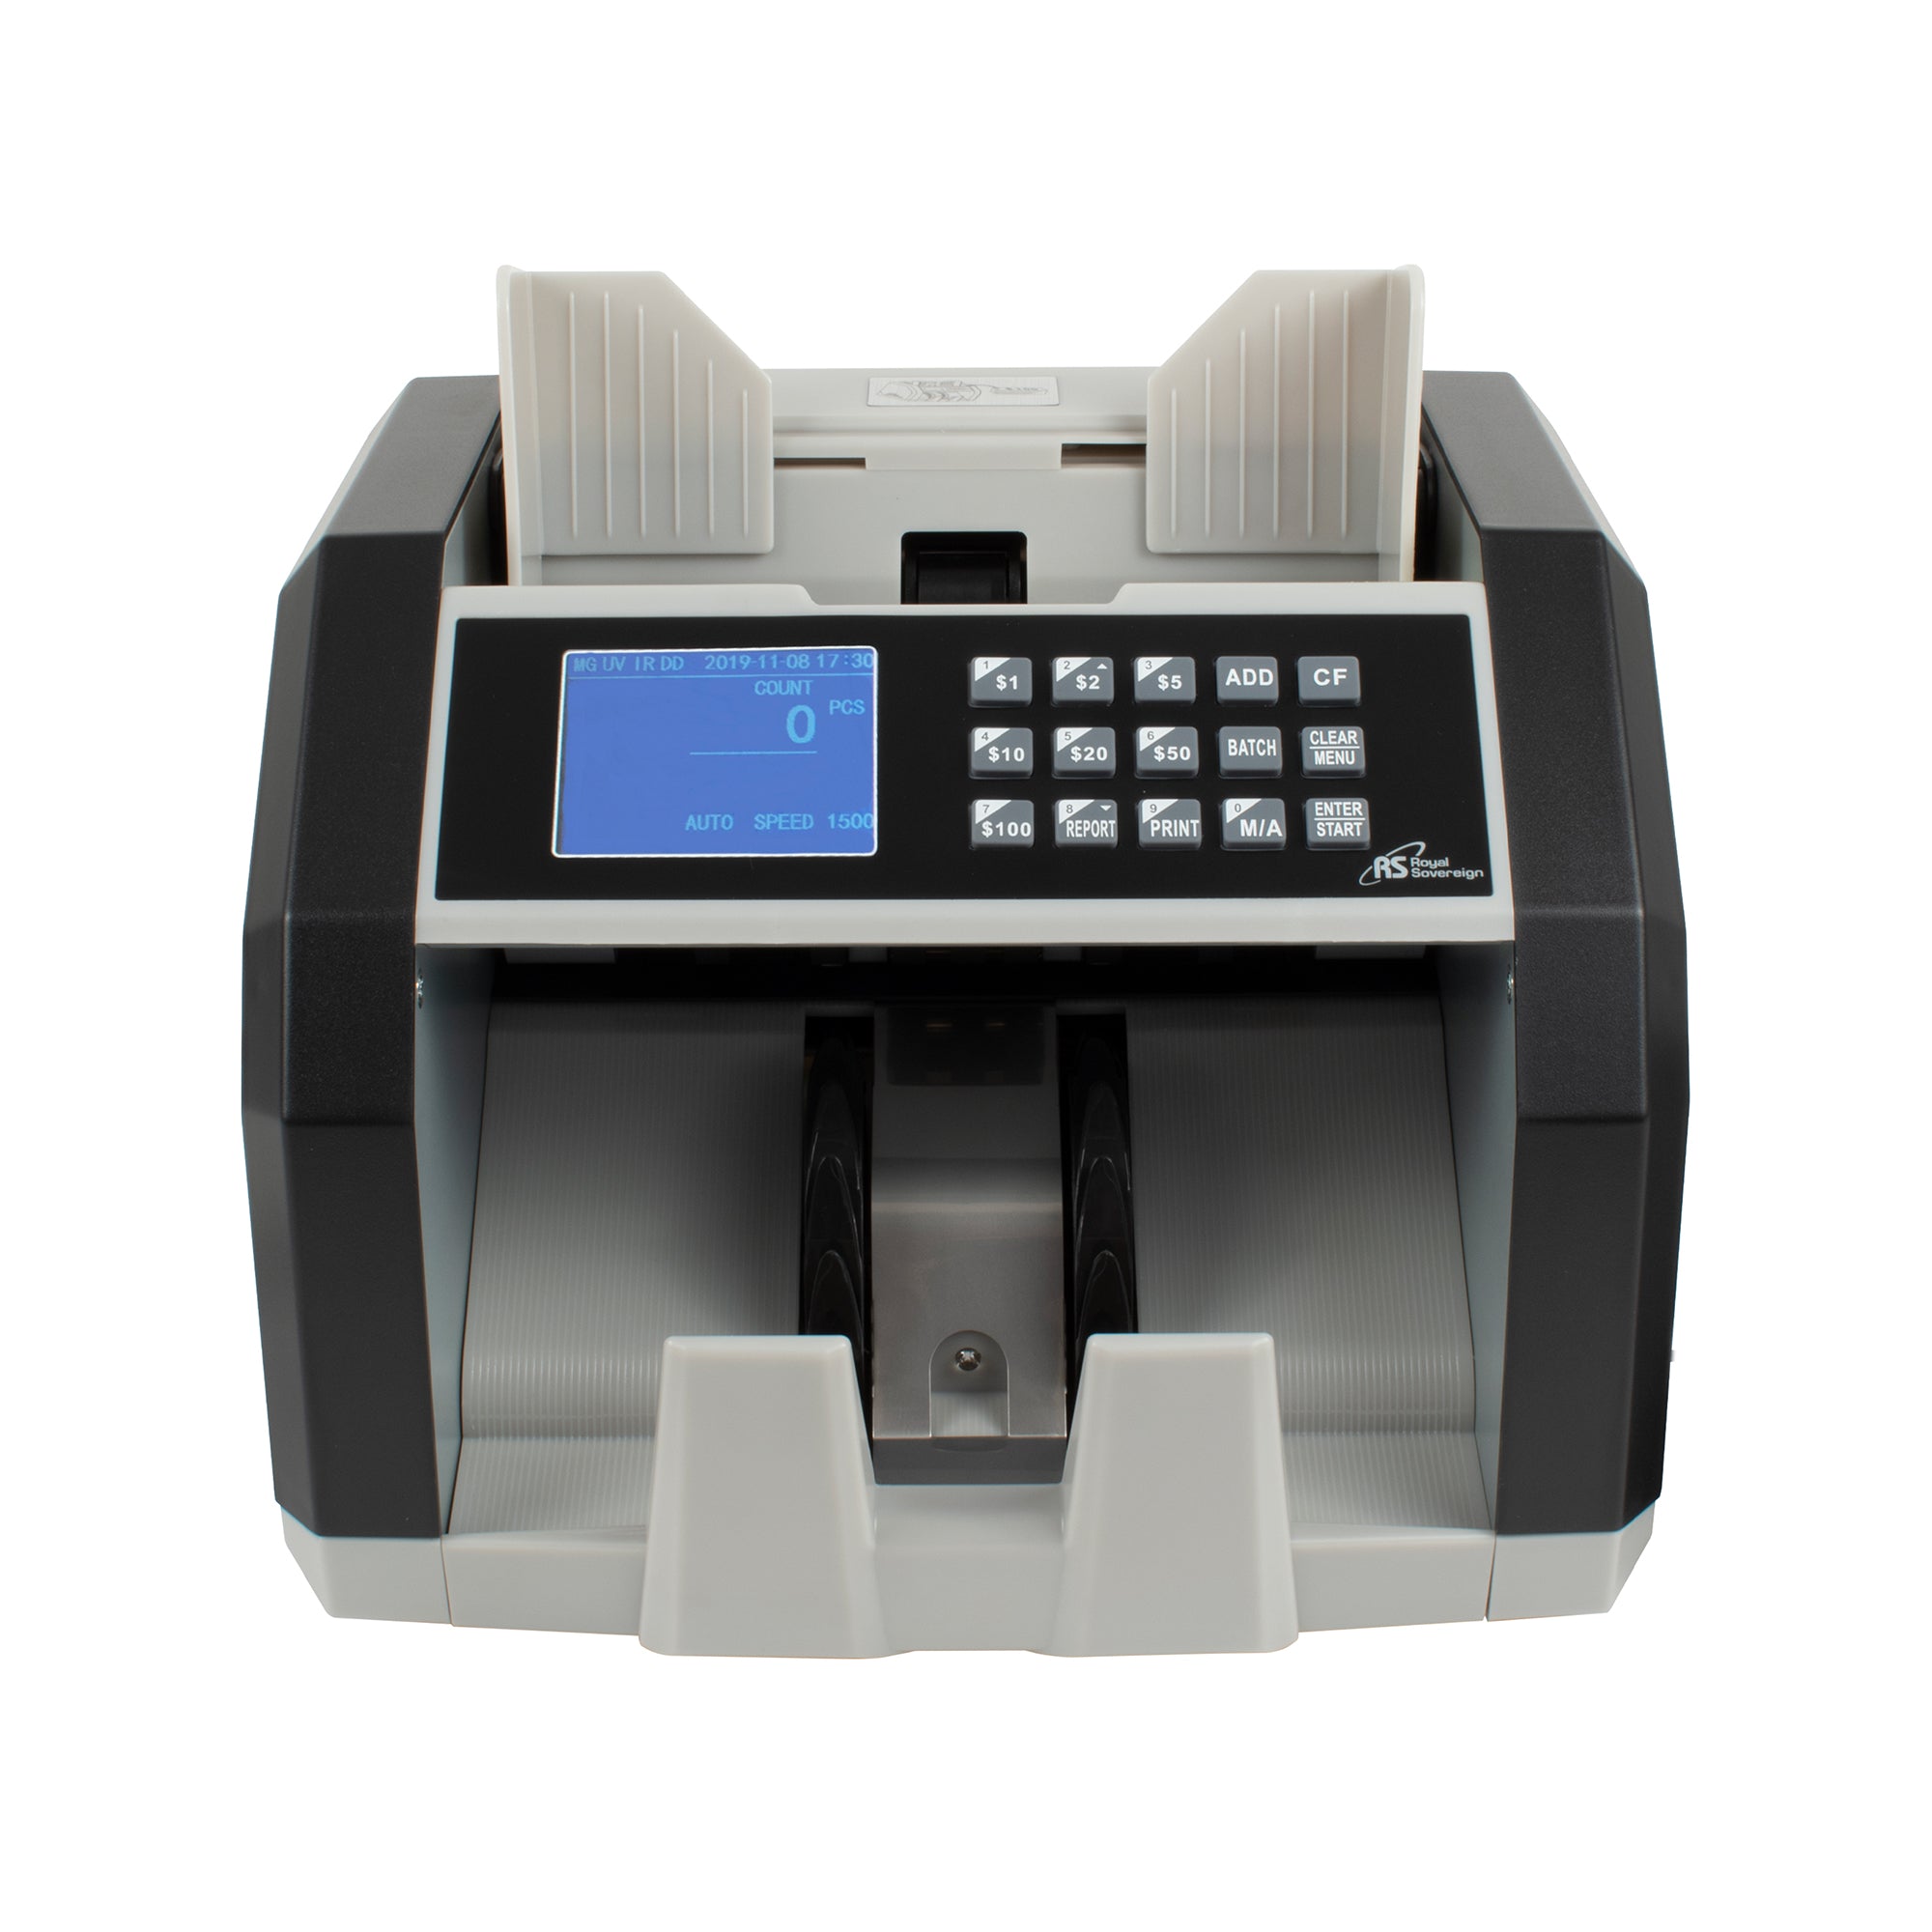 RBC-ED250, Bill Counter with Value Detection, Counterfeit Identification